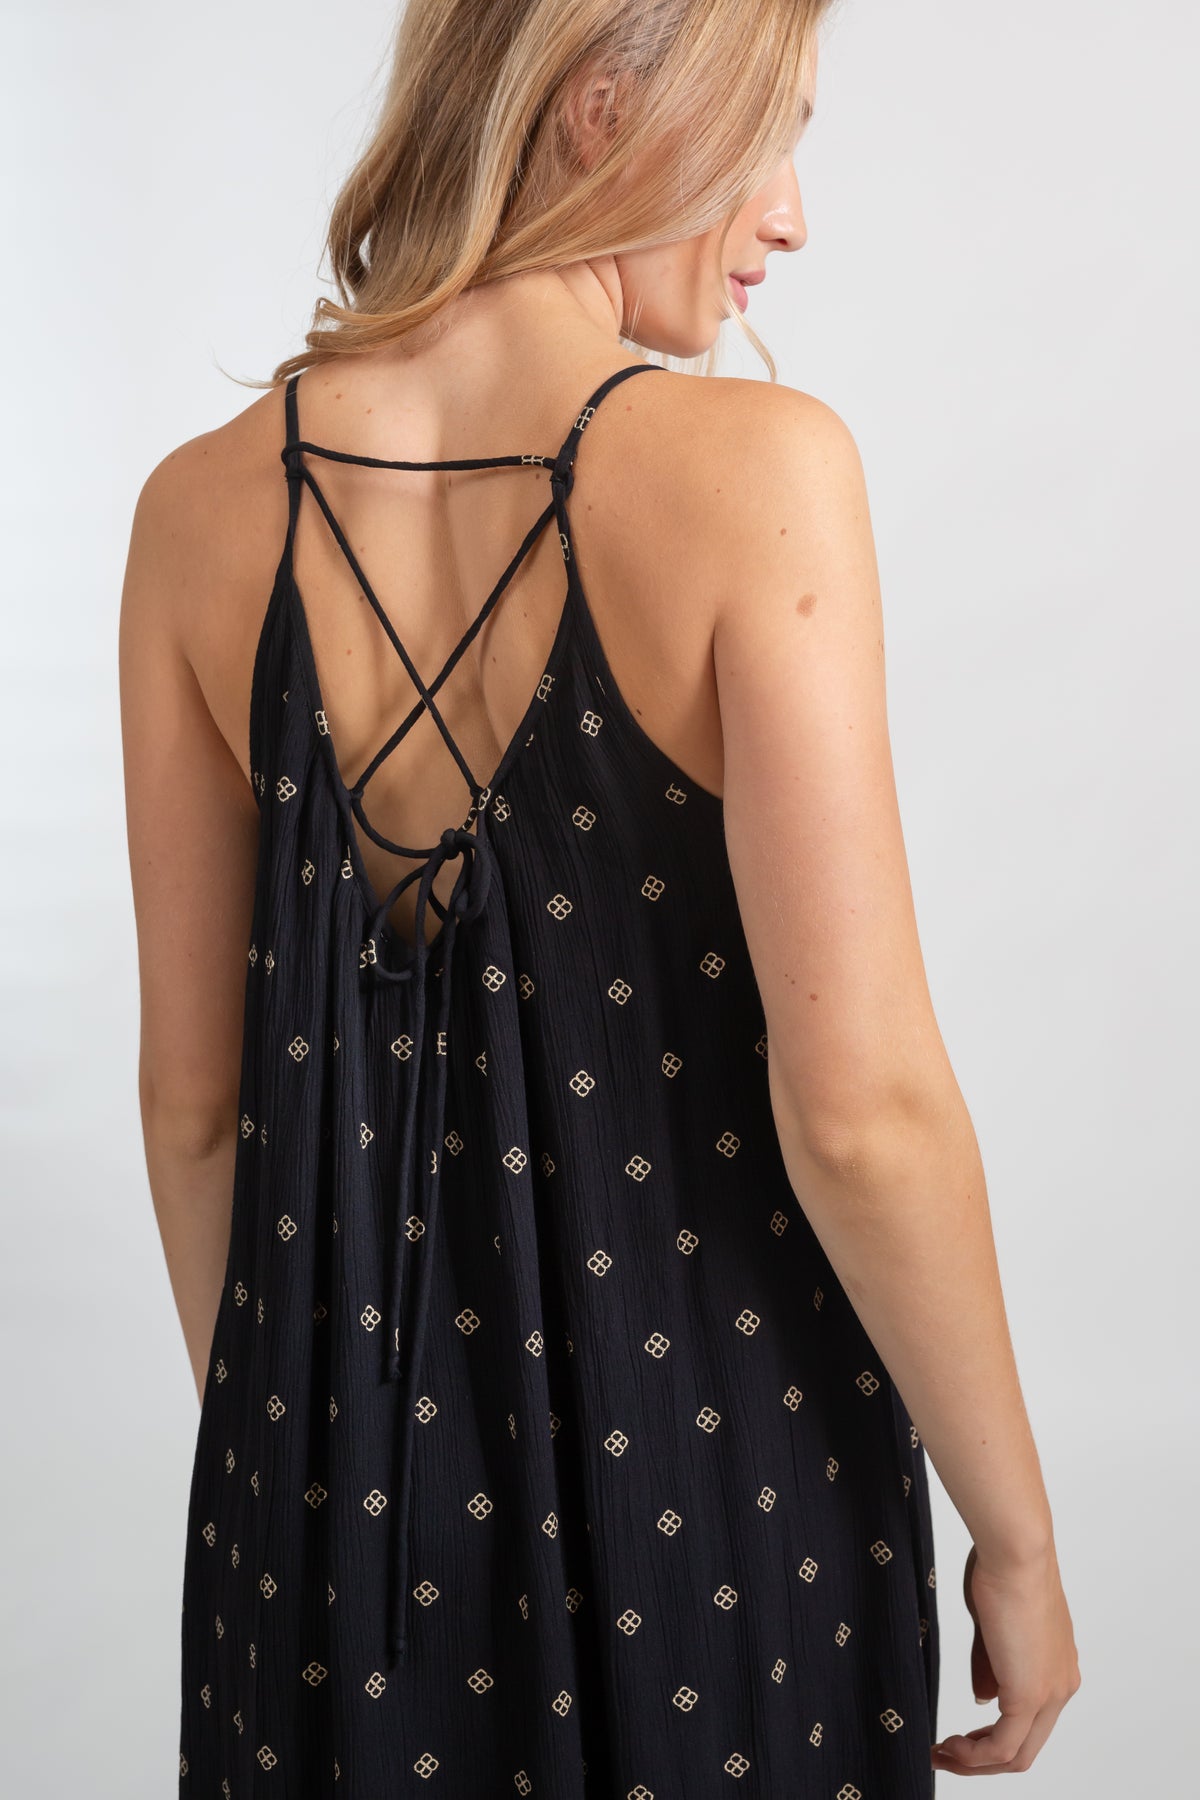 the back of a blonde hair female model wearing a black with gold dot print design strappy dress